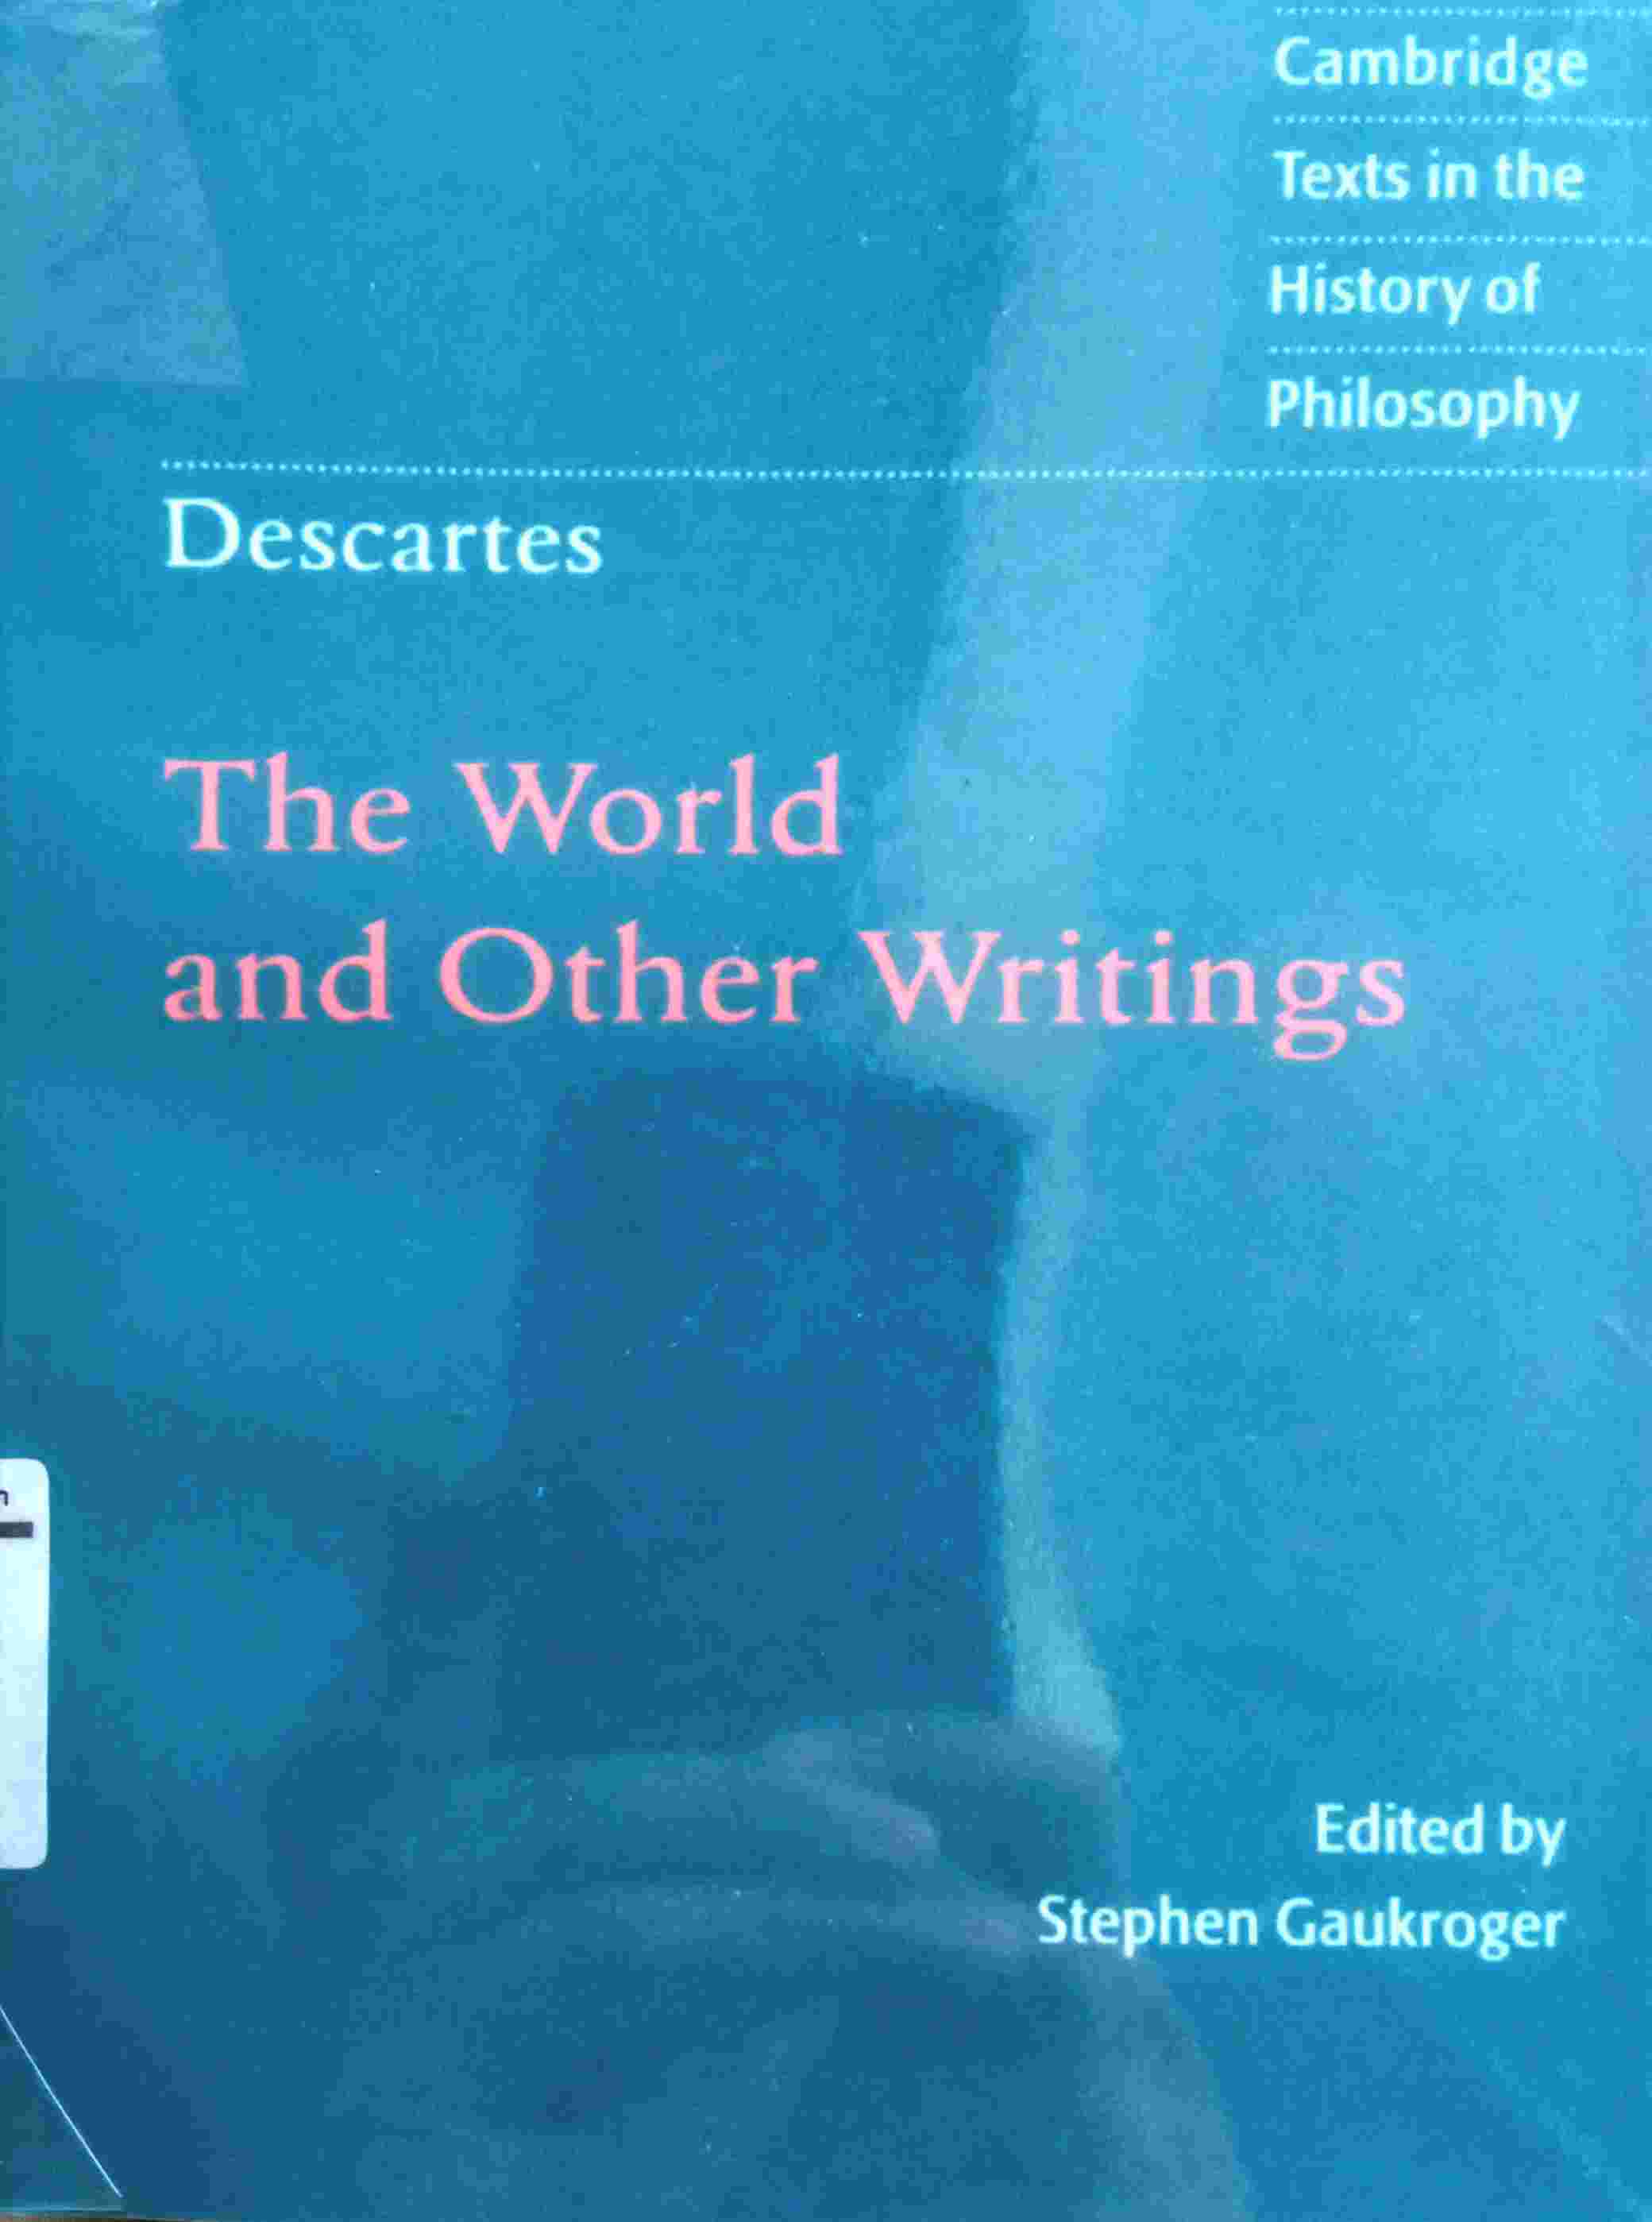 DESCARTES - THE WORLD AND OTHER WRITINGS